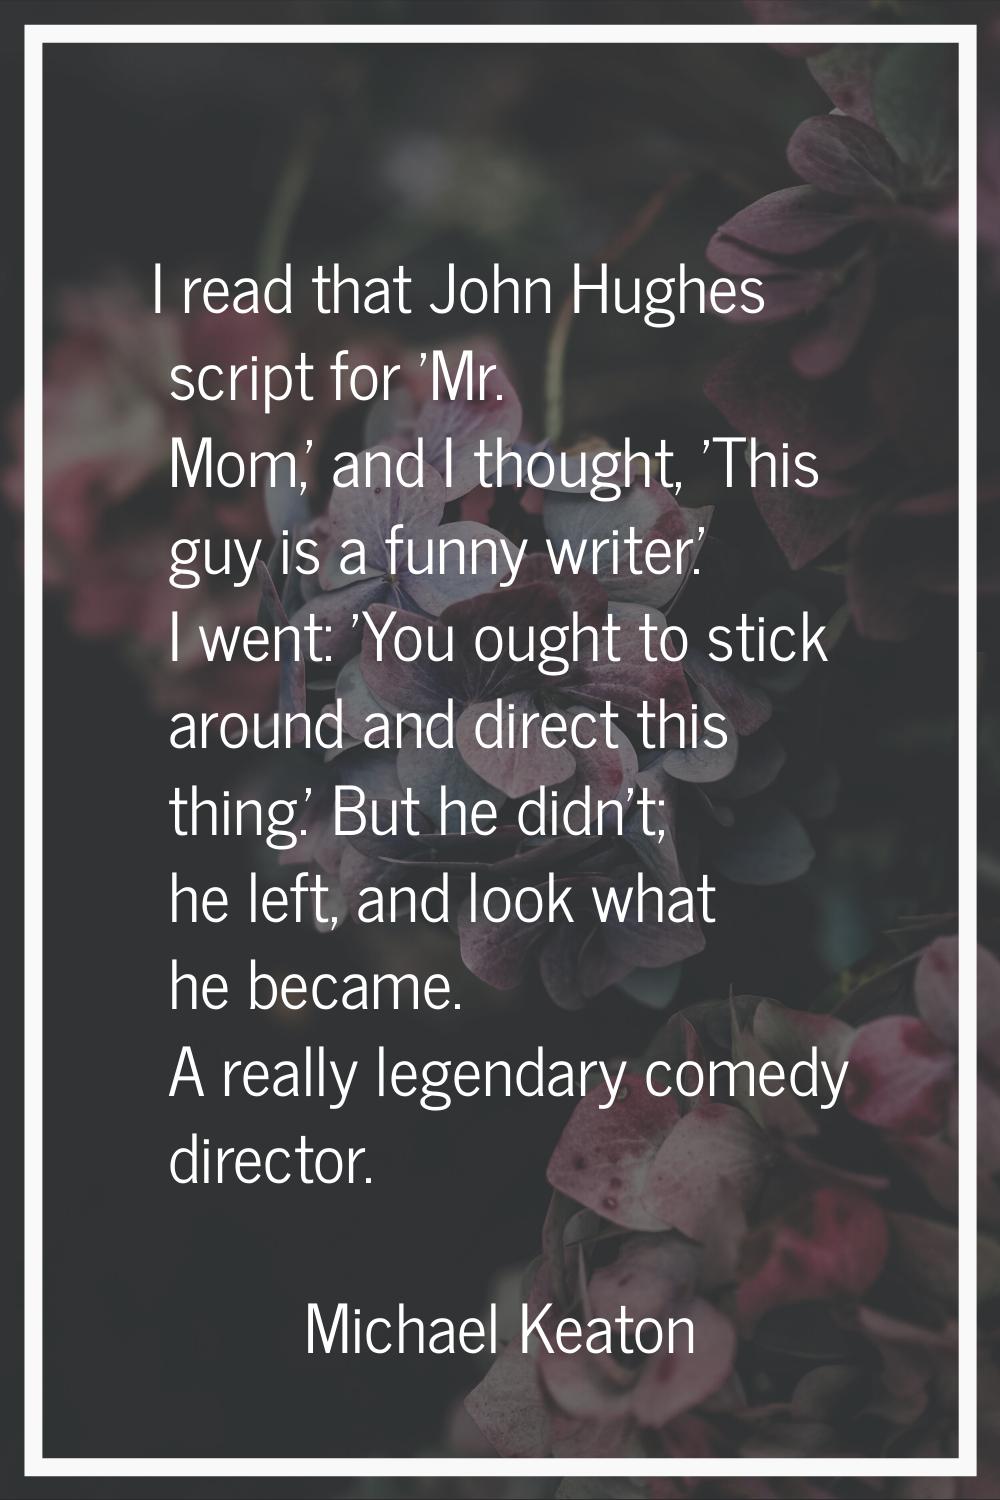 I read that John Hughes script for 'Mr. Mom,' and I thought, 'This guy is a funny writer.' I went: 